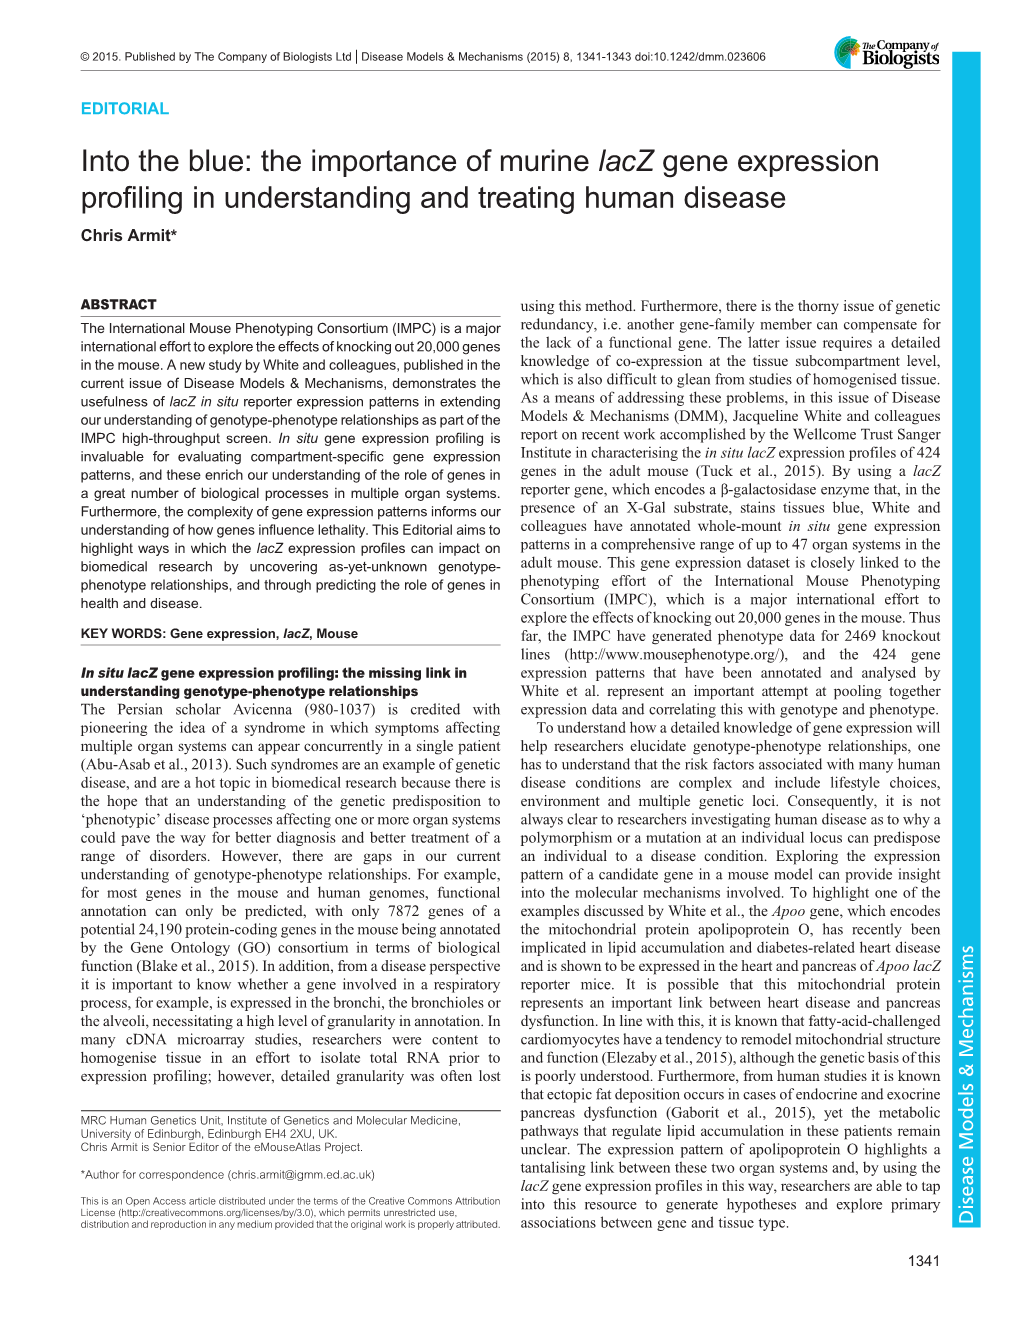 Into the Blue: the Importance of Murine Lacz Gene Expression Profiling in Understanding and Treating Human Disease Chris Armit*